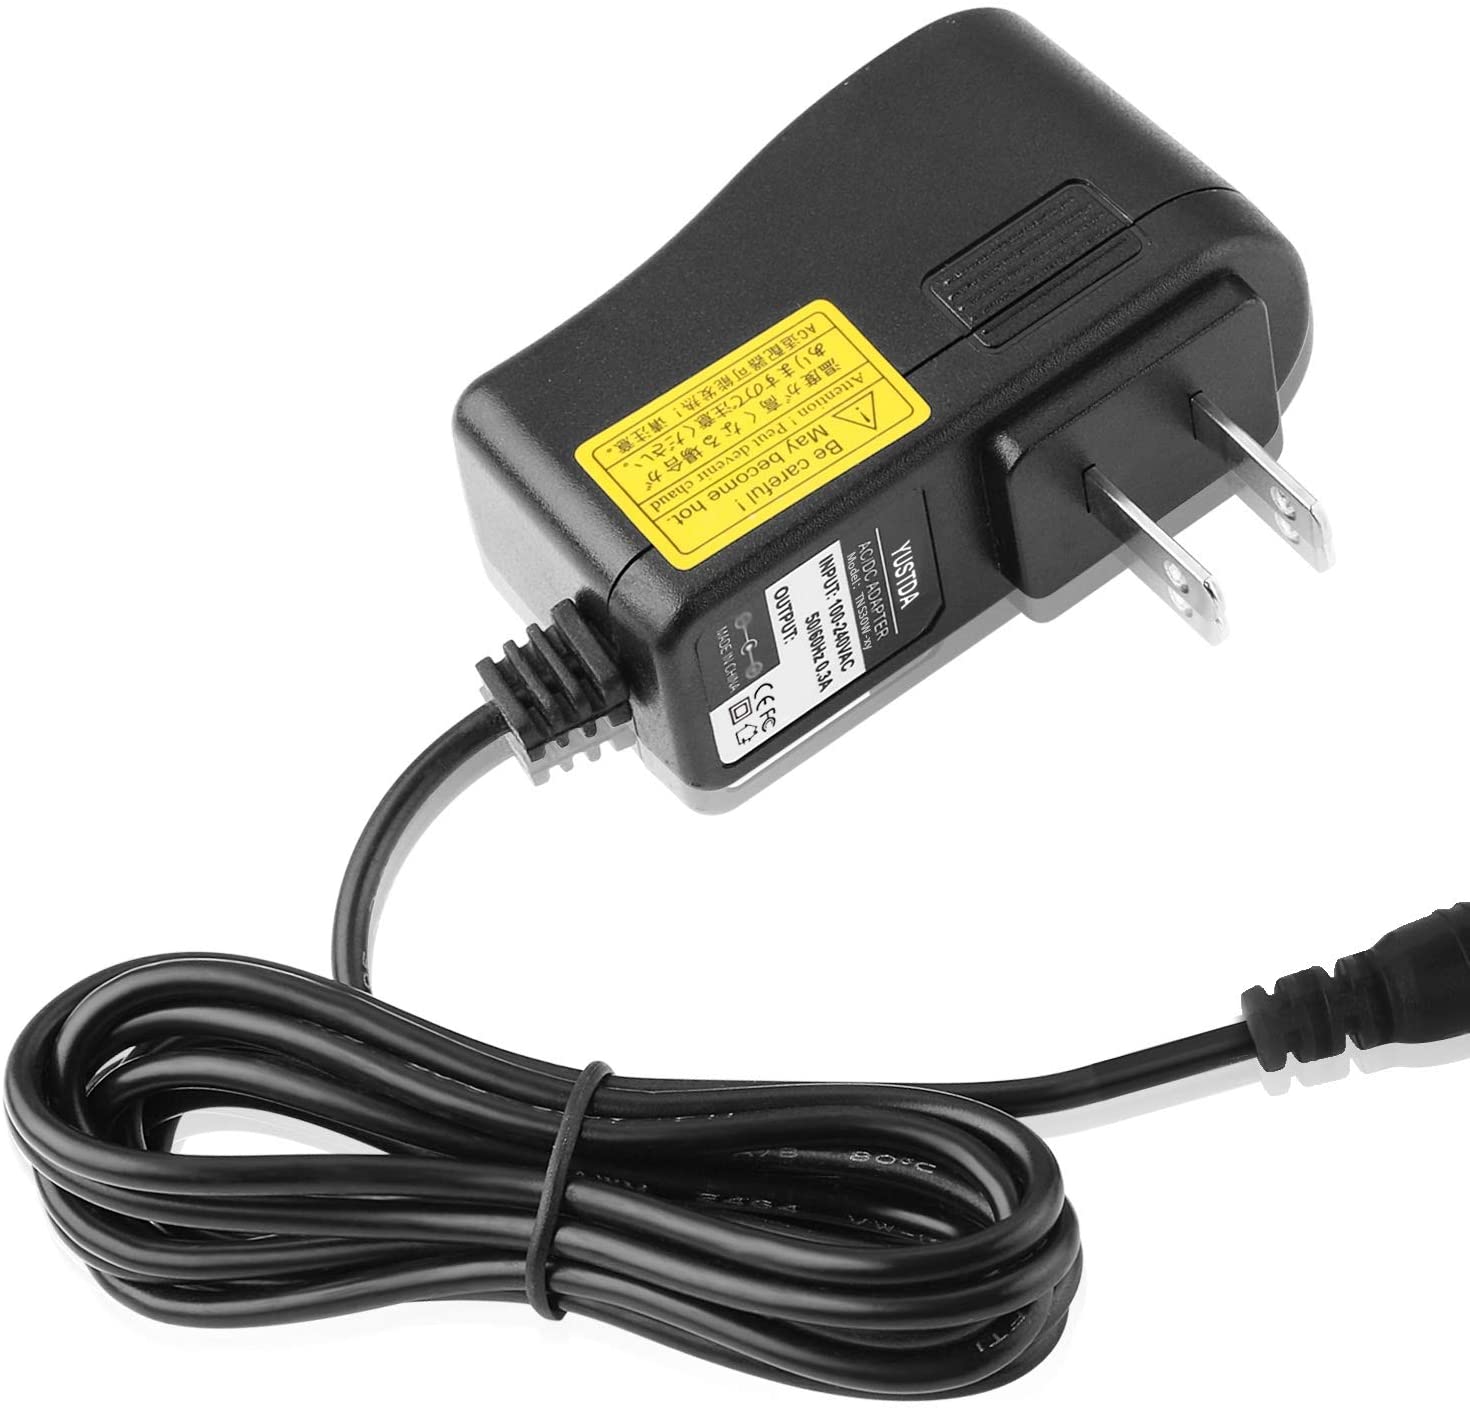 Yustda 12V AC/DC Adapter Replacement for Roland ACO-120T Model: A41210T Boss Electric Piano Keyboard Class 2 Transformer 12VDC DC12V 12.0V 12 Volts Power Supply Cord Home Wall Charger PSU - image 3 of 4